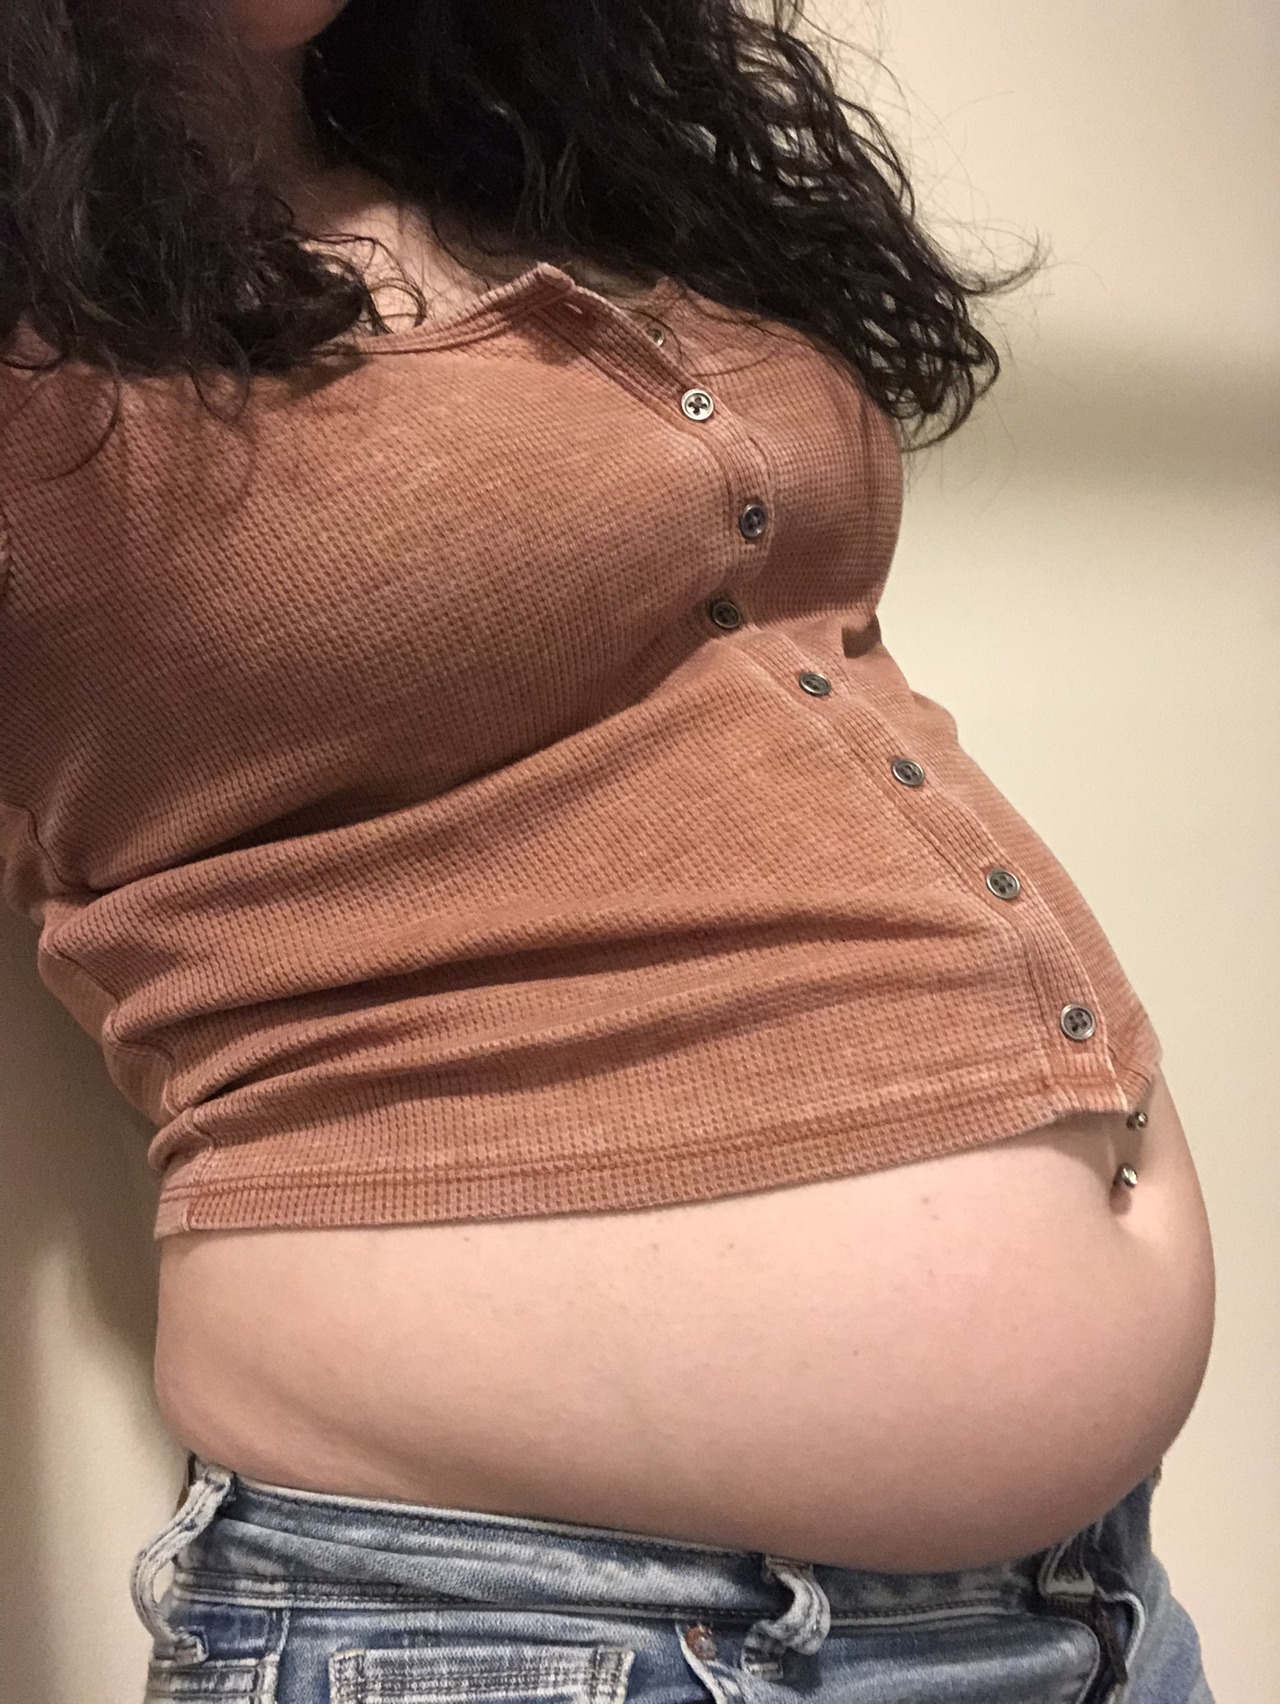 Belly stuffing tight clothes